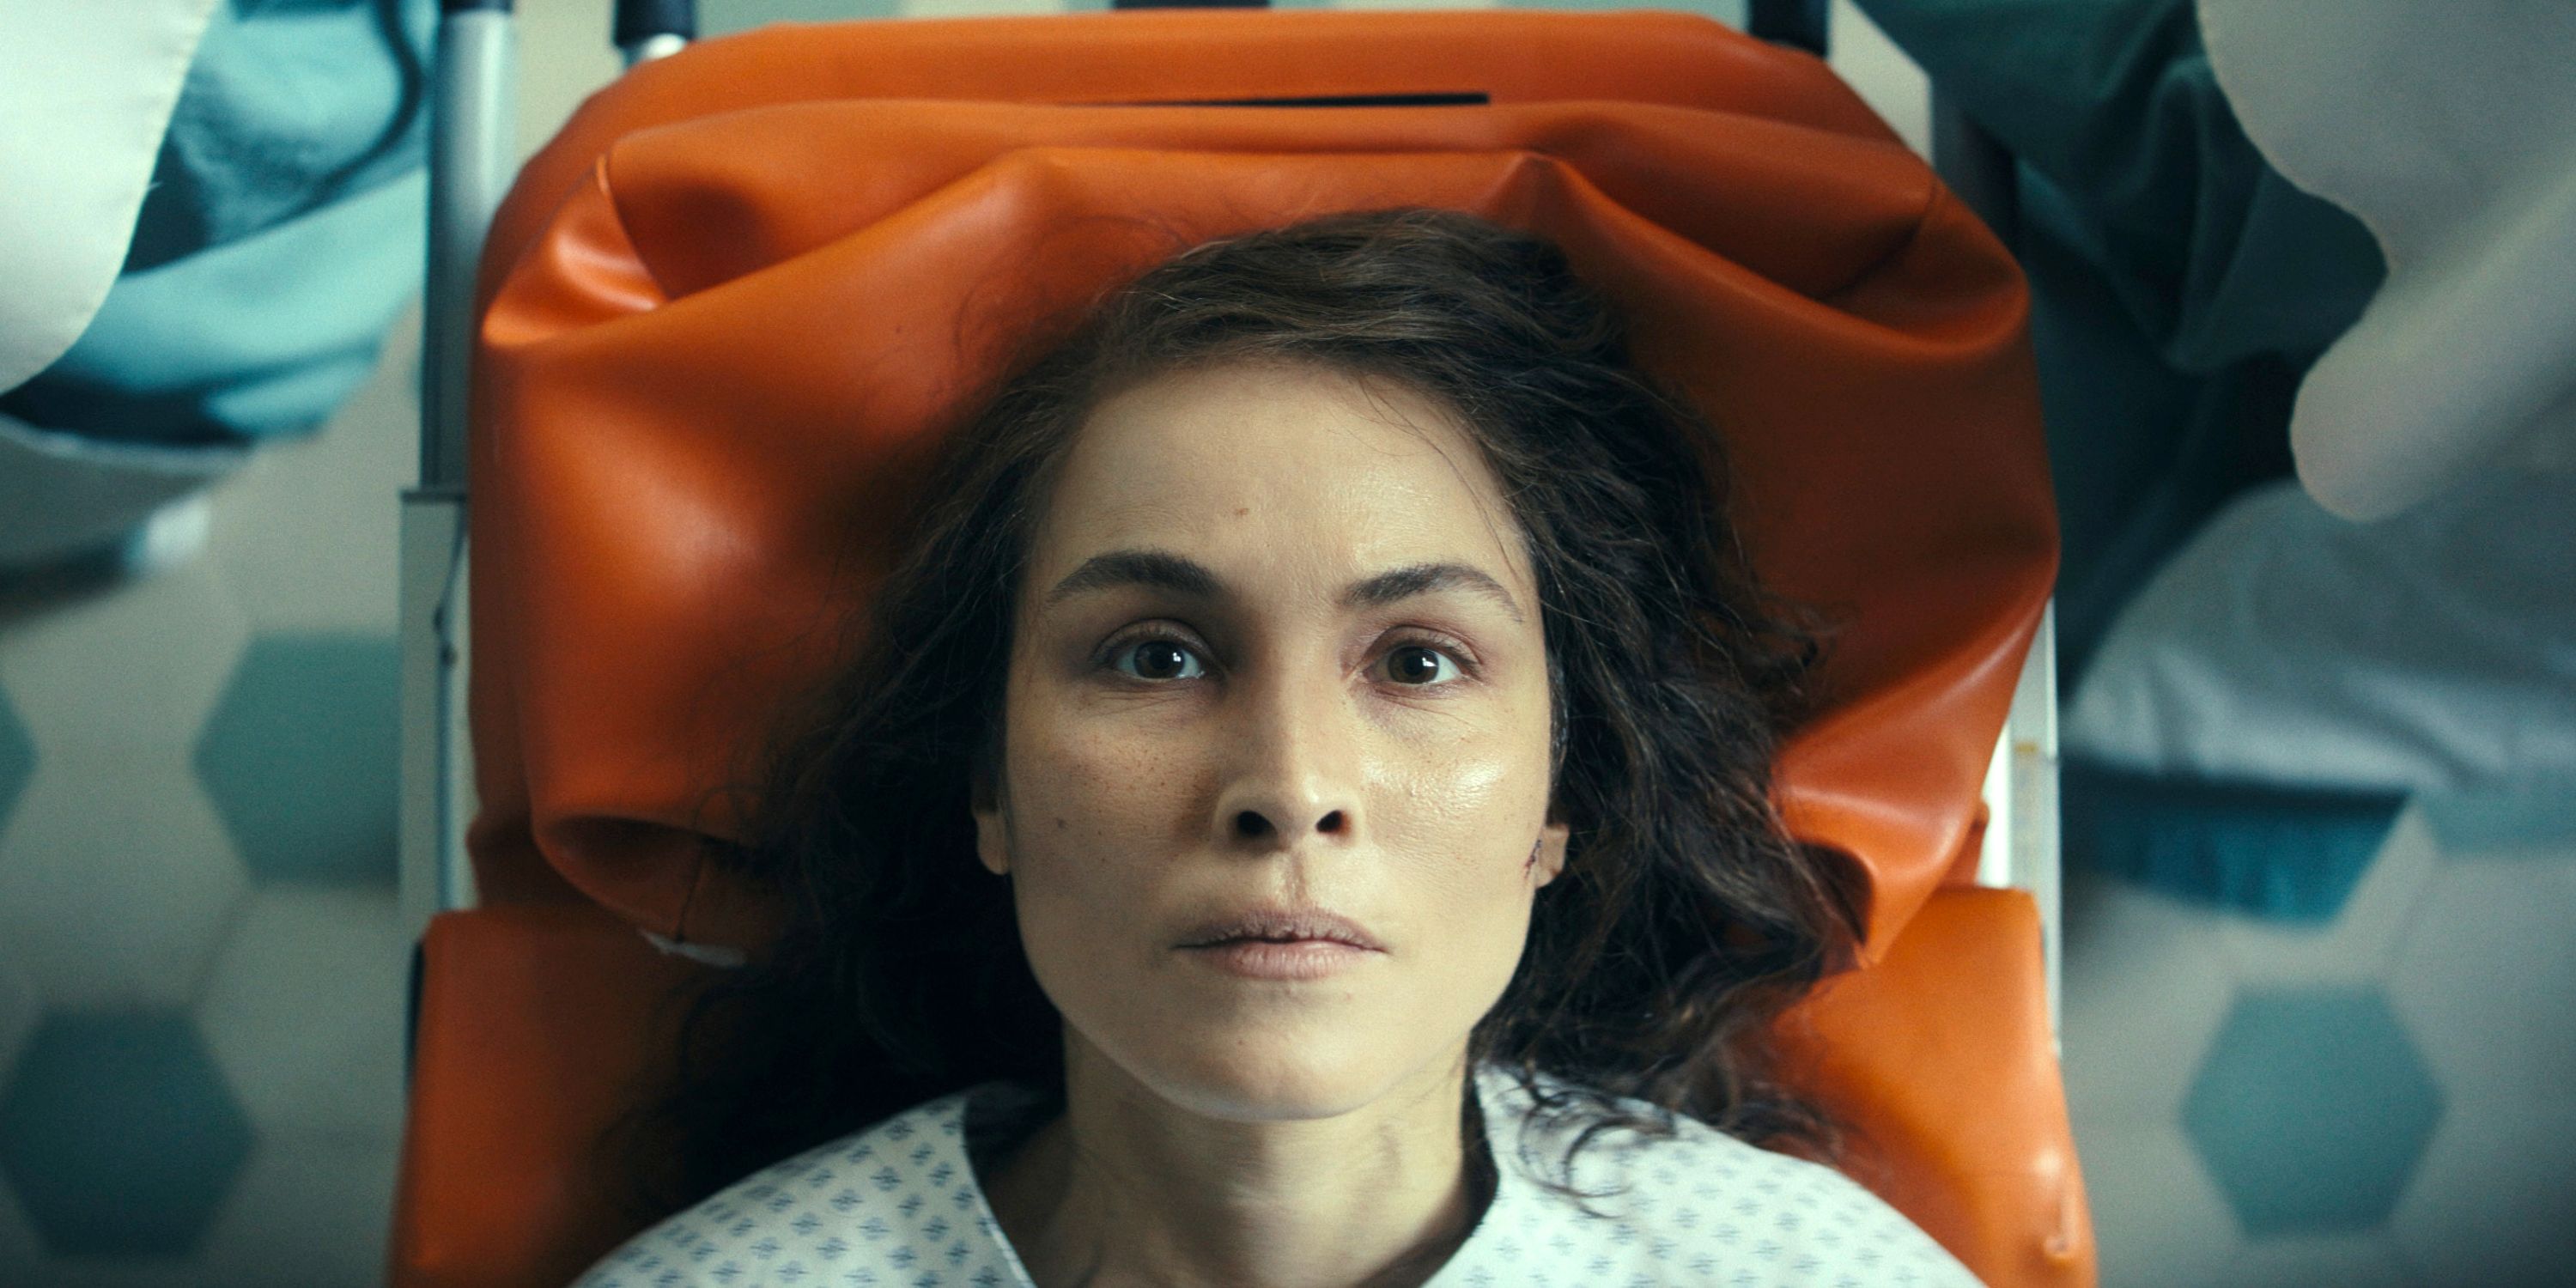 Noomi Rapace as Jo Ericsson on an orange gurney in Episode 8 of Season 1 of Constellation